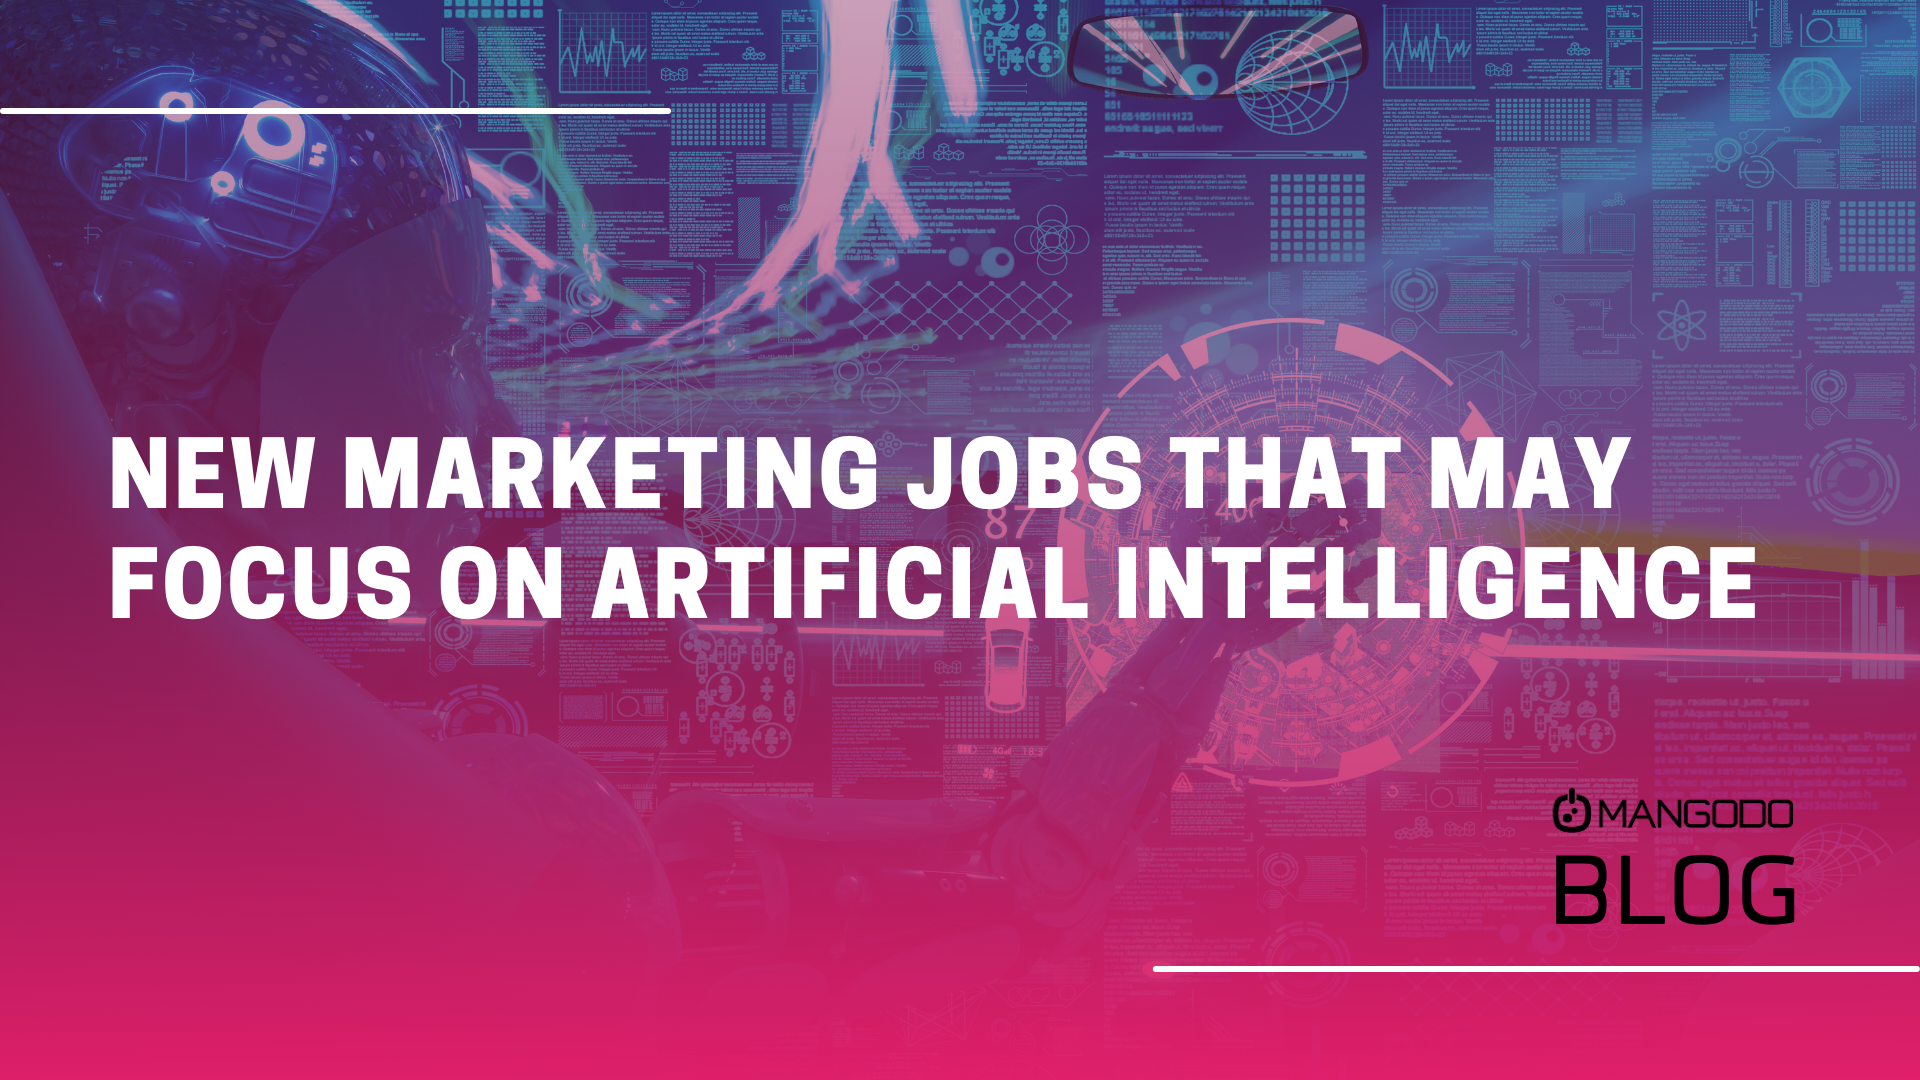 New Marketing Jobs That May Focus on Artificial Intelligence